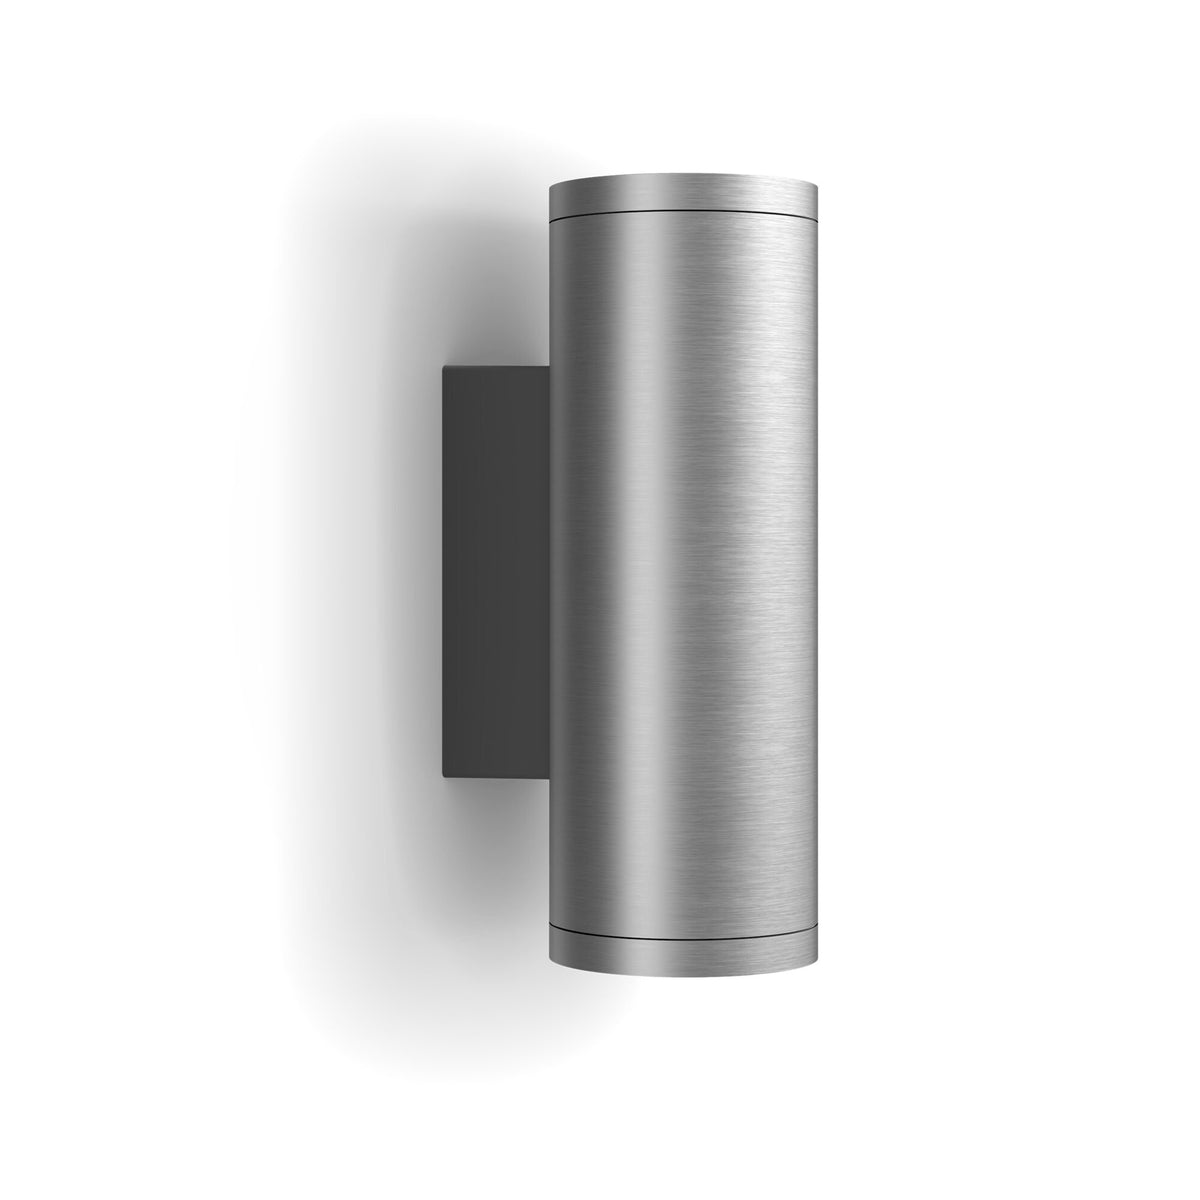 Philips Hue Appear Outdoor wall light in Stainless Steel - White and colour ambience